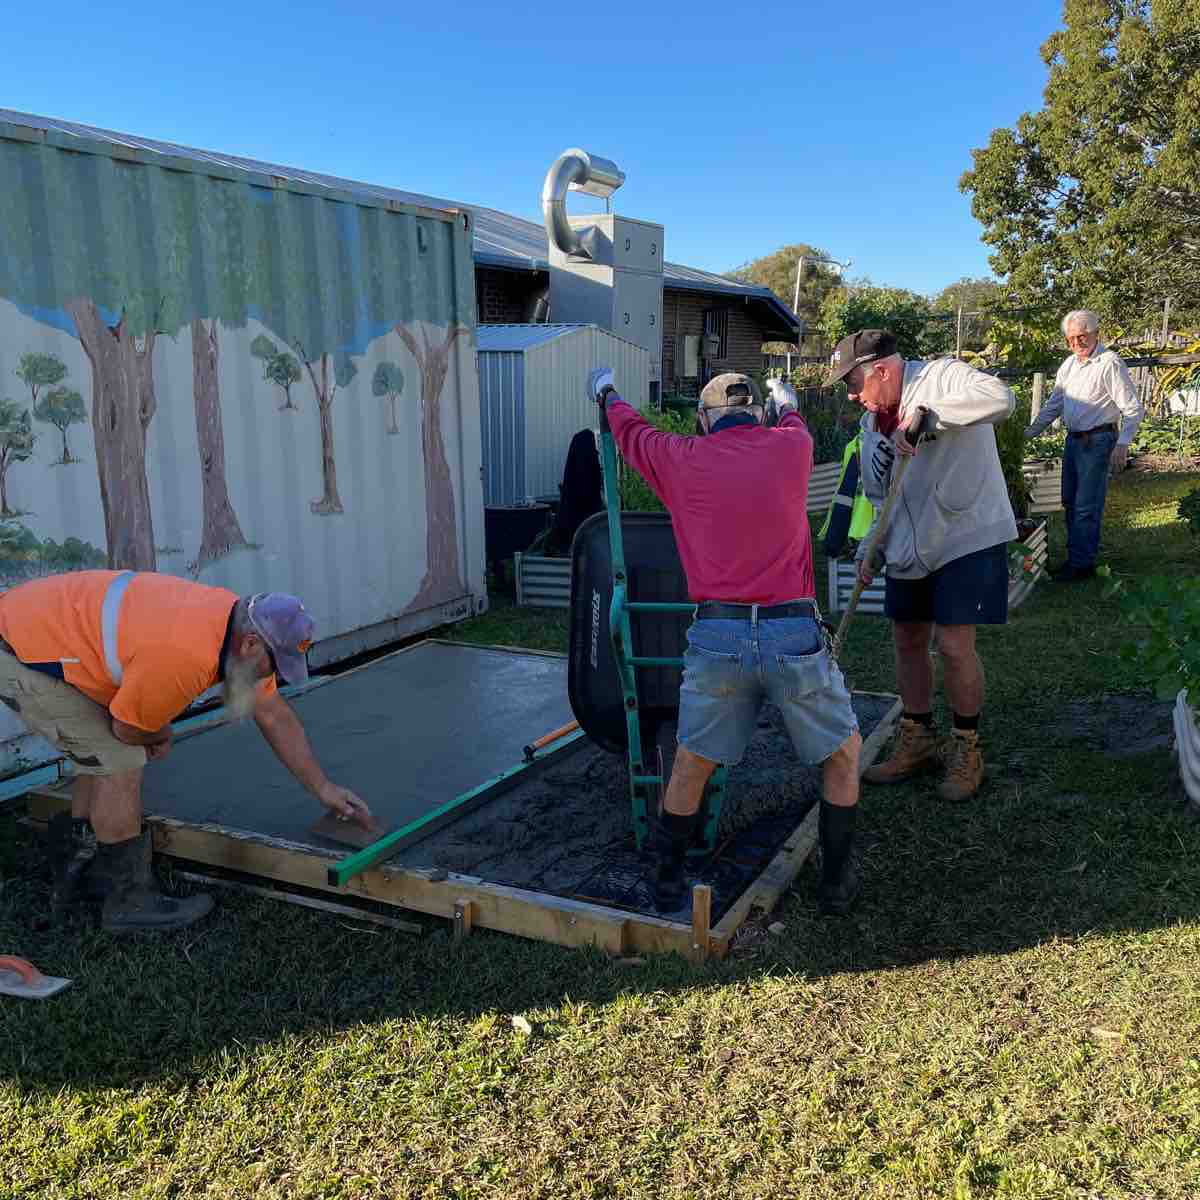 "Saturday Triumph: Oxenford Men's Shed Paves Way to Progress"